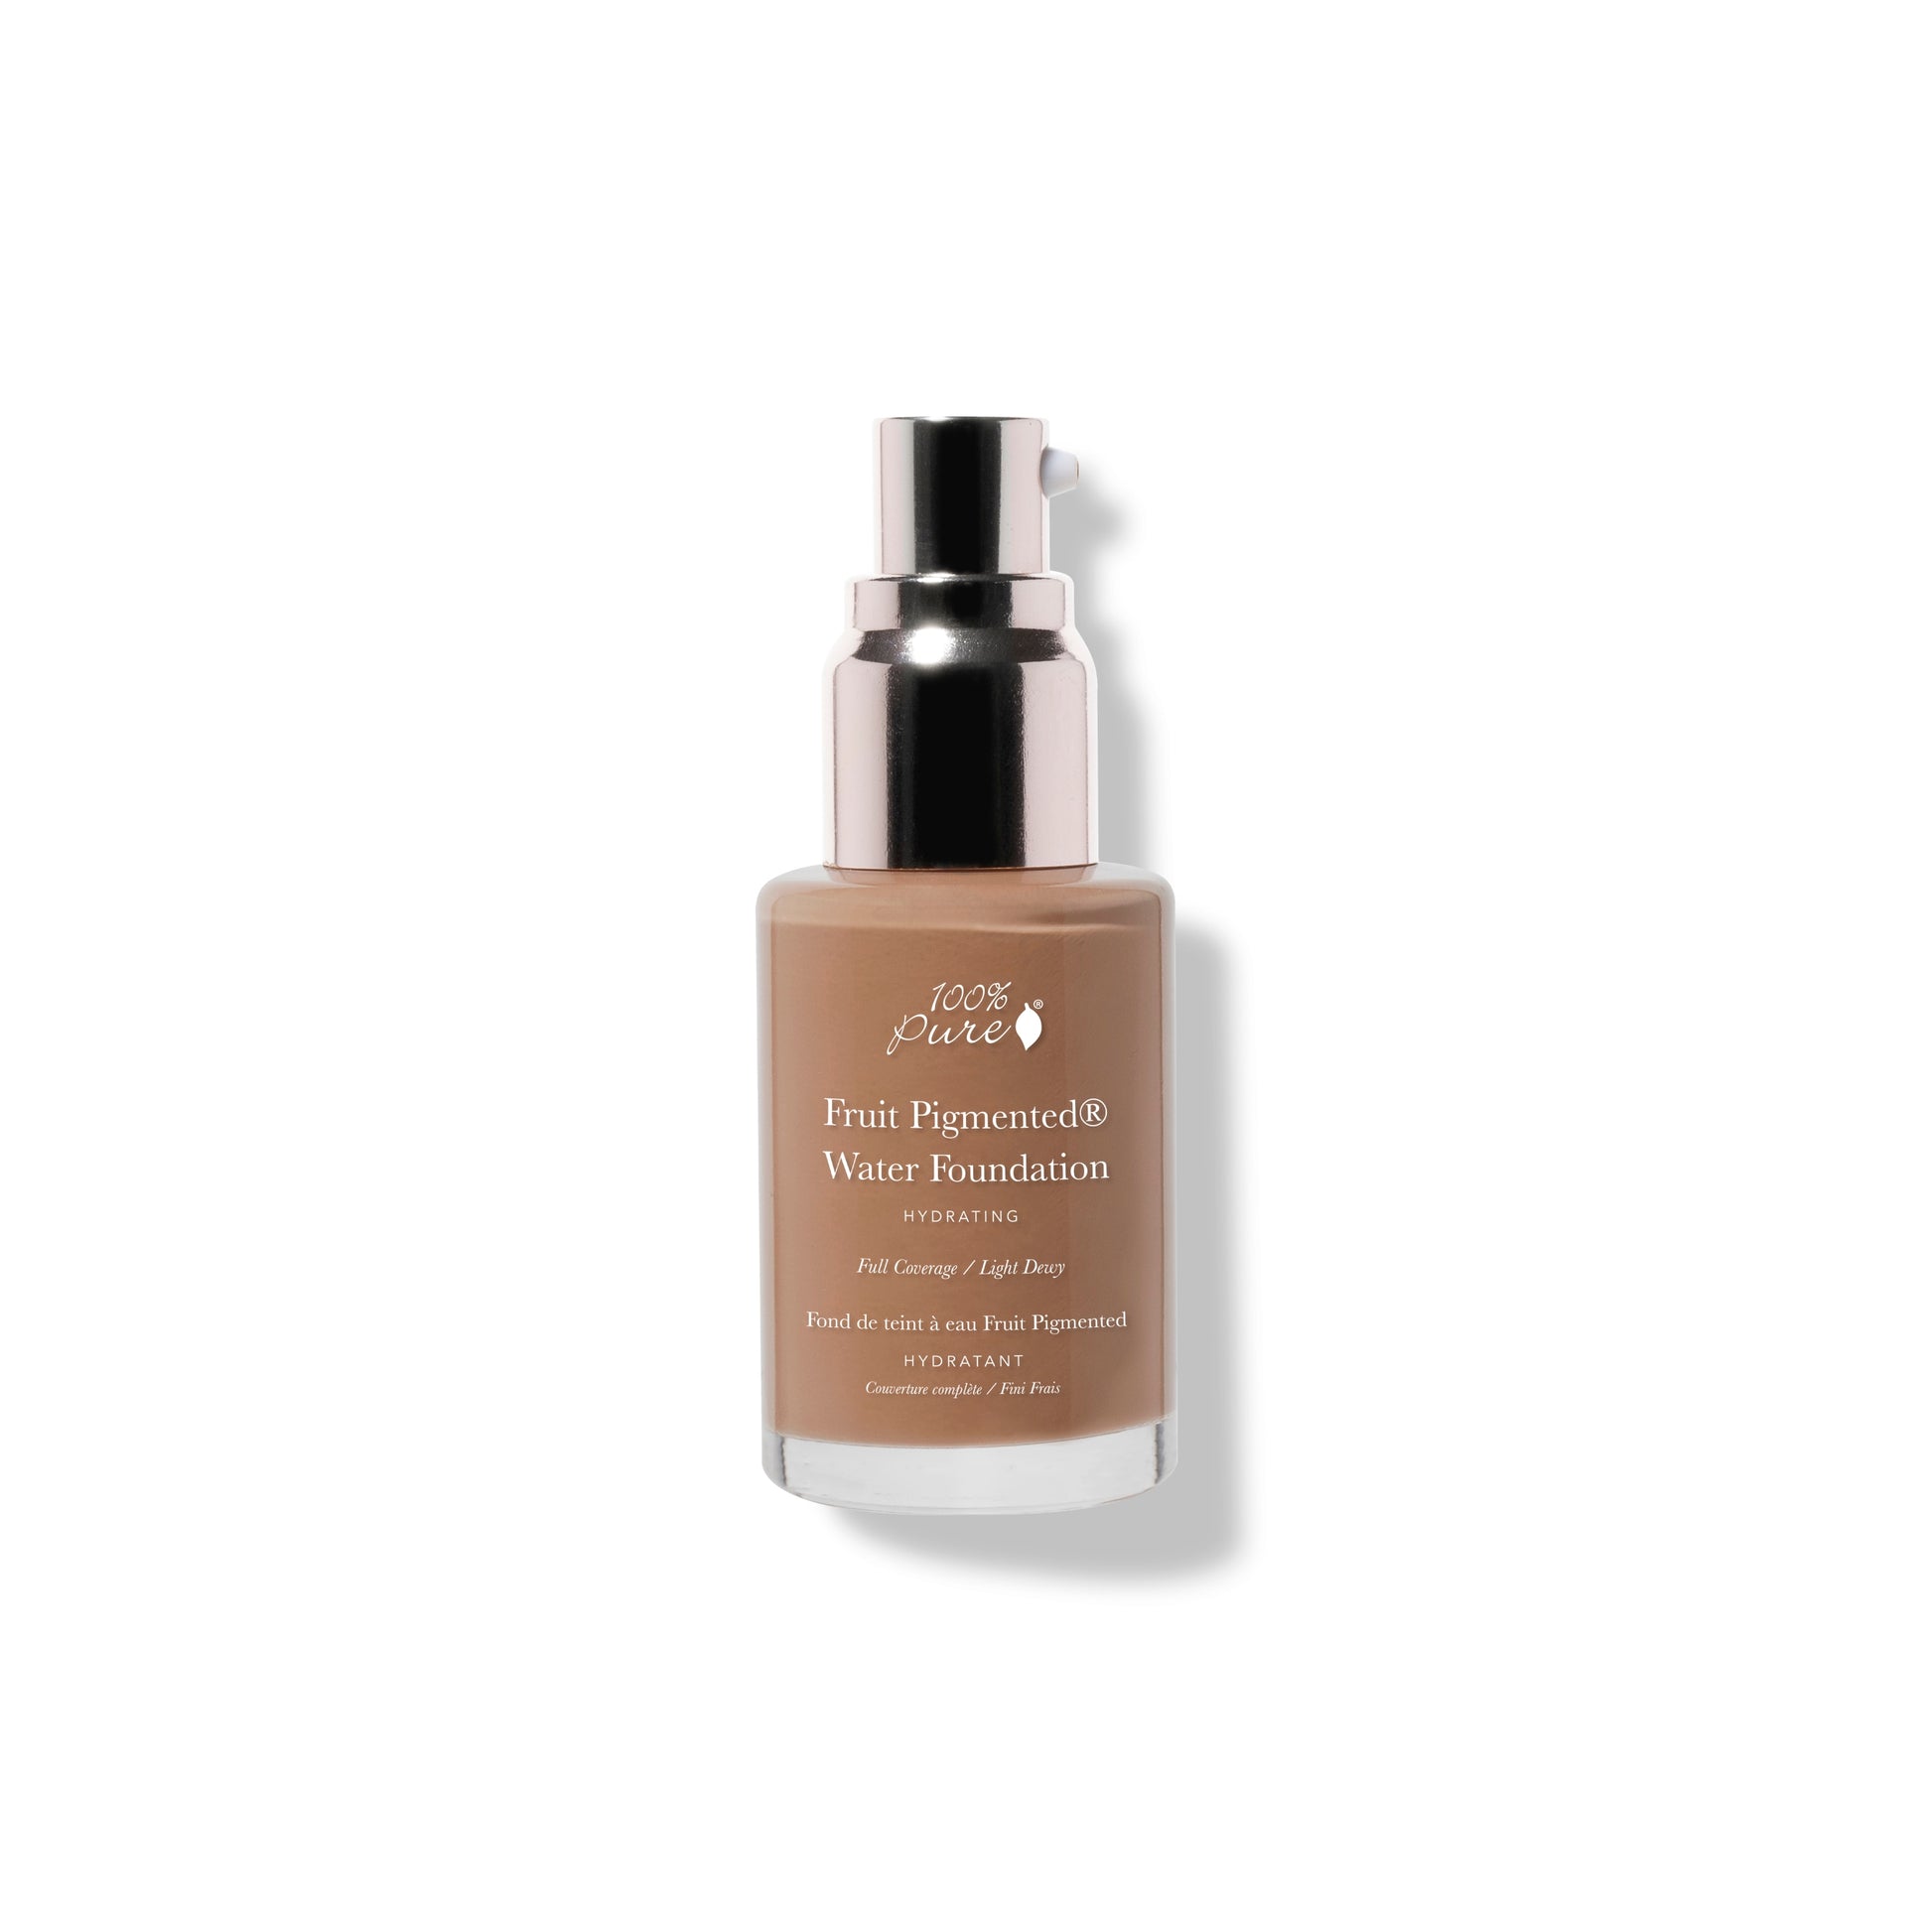 100% PURE Fruit Pigmented Full Coverage Water Foundation olive 4.0